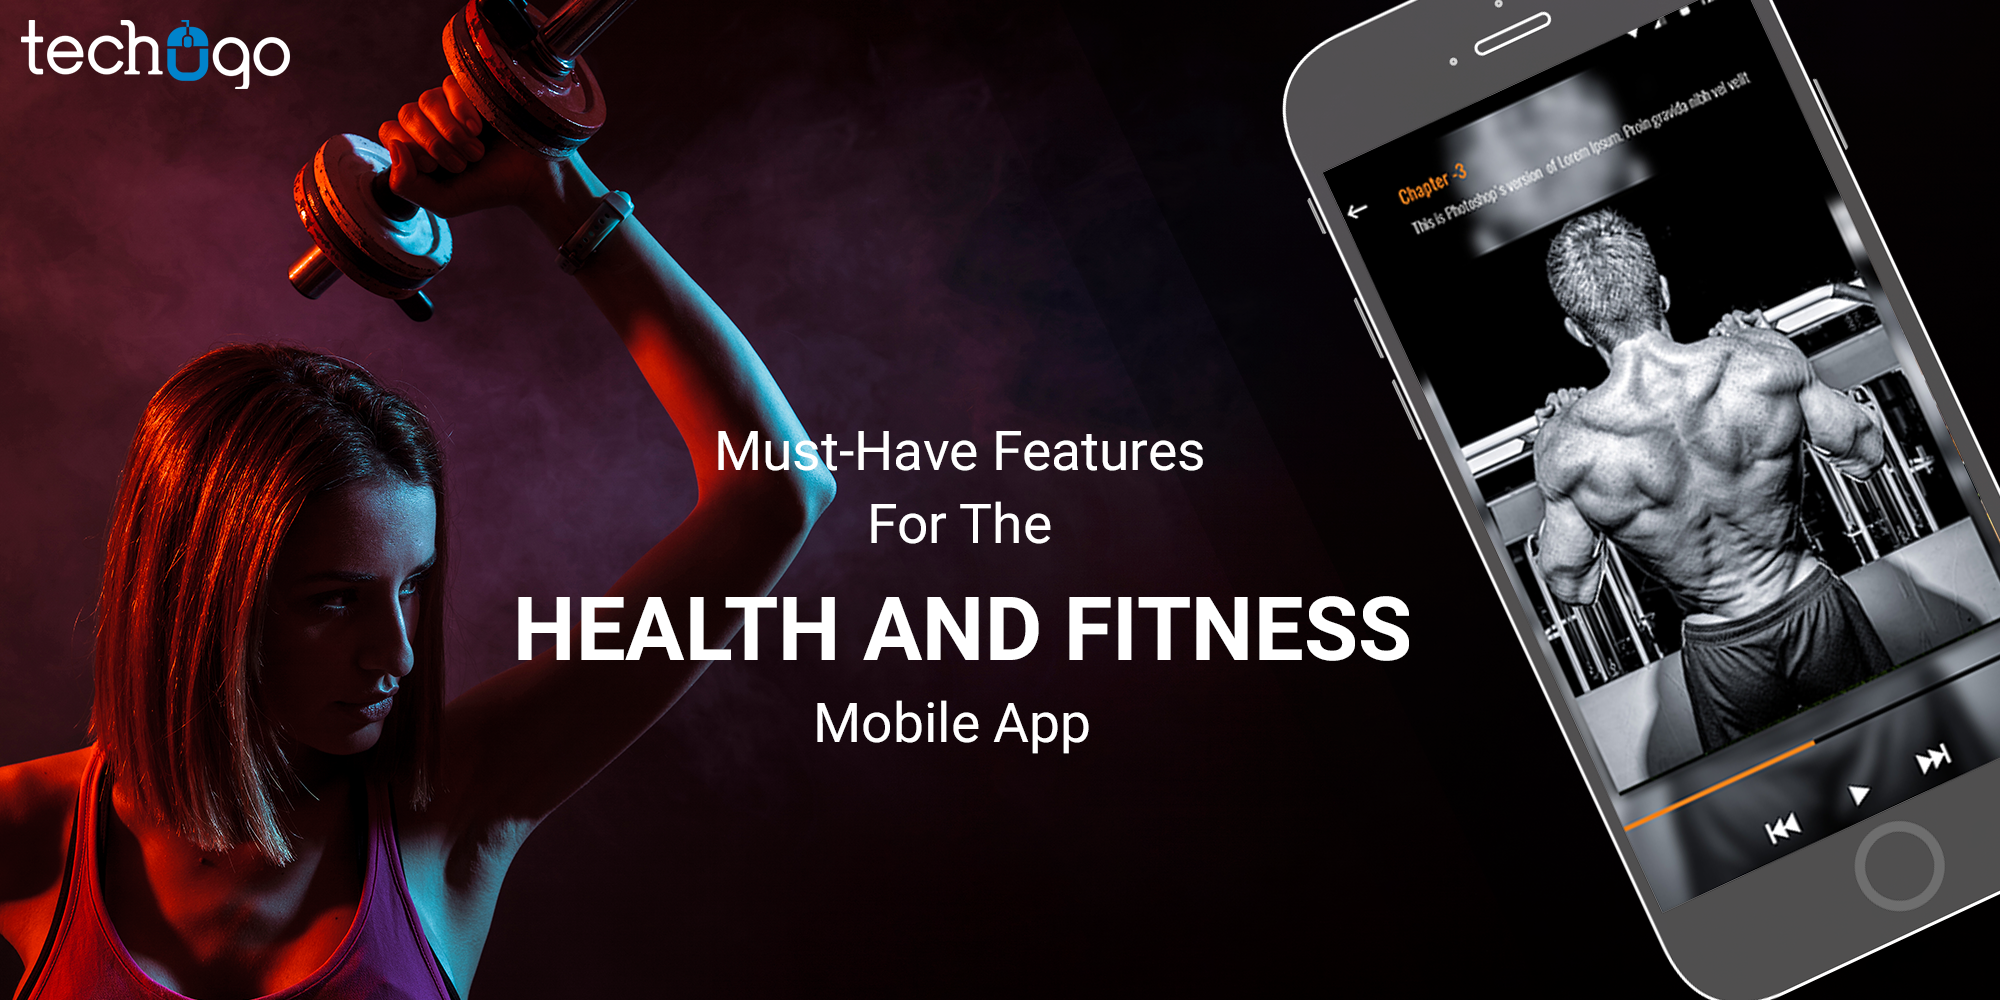 Must-Have Features For The Health And Fitness Mobile App